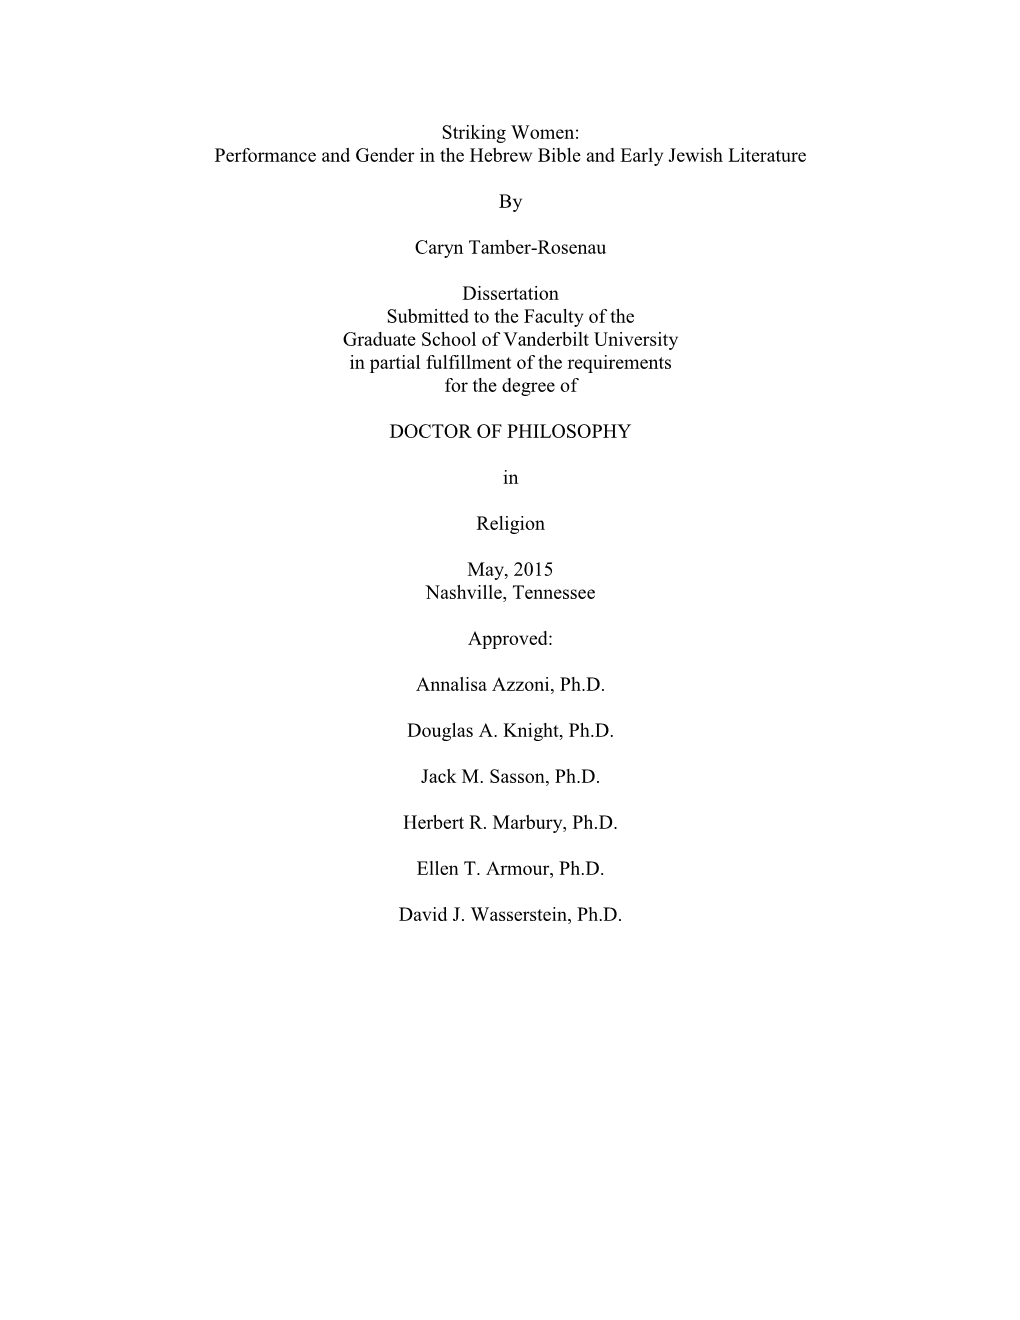 Striking Women: Performance and Gender in the Hebrew Bible and Early Jewish Literature by Caryn Tamber-Rosenau Dissertation Subm